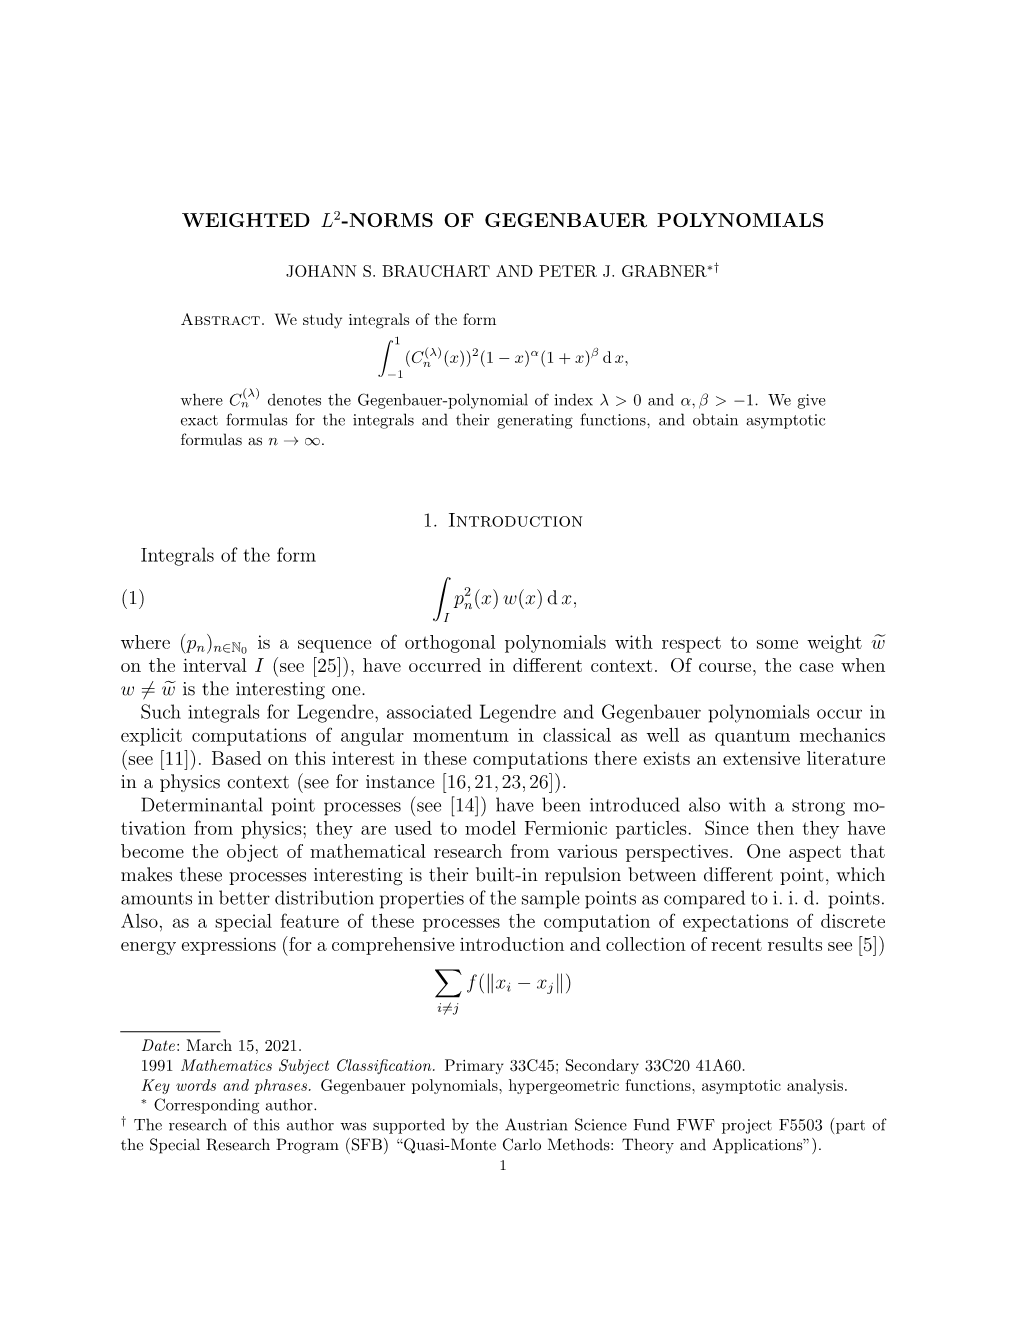 WEIGHTED L2-NORMS of GEGENBAUER POLYNOMIALS 1. Introduction Integrals of the Form (1) ∫ P2 N(X)W(X)Dx, Where (Pn)N∈N0 Is